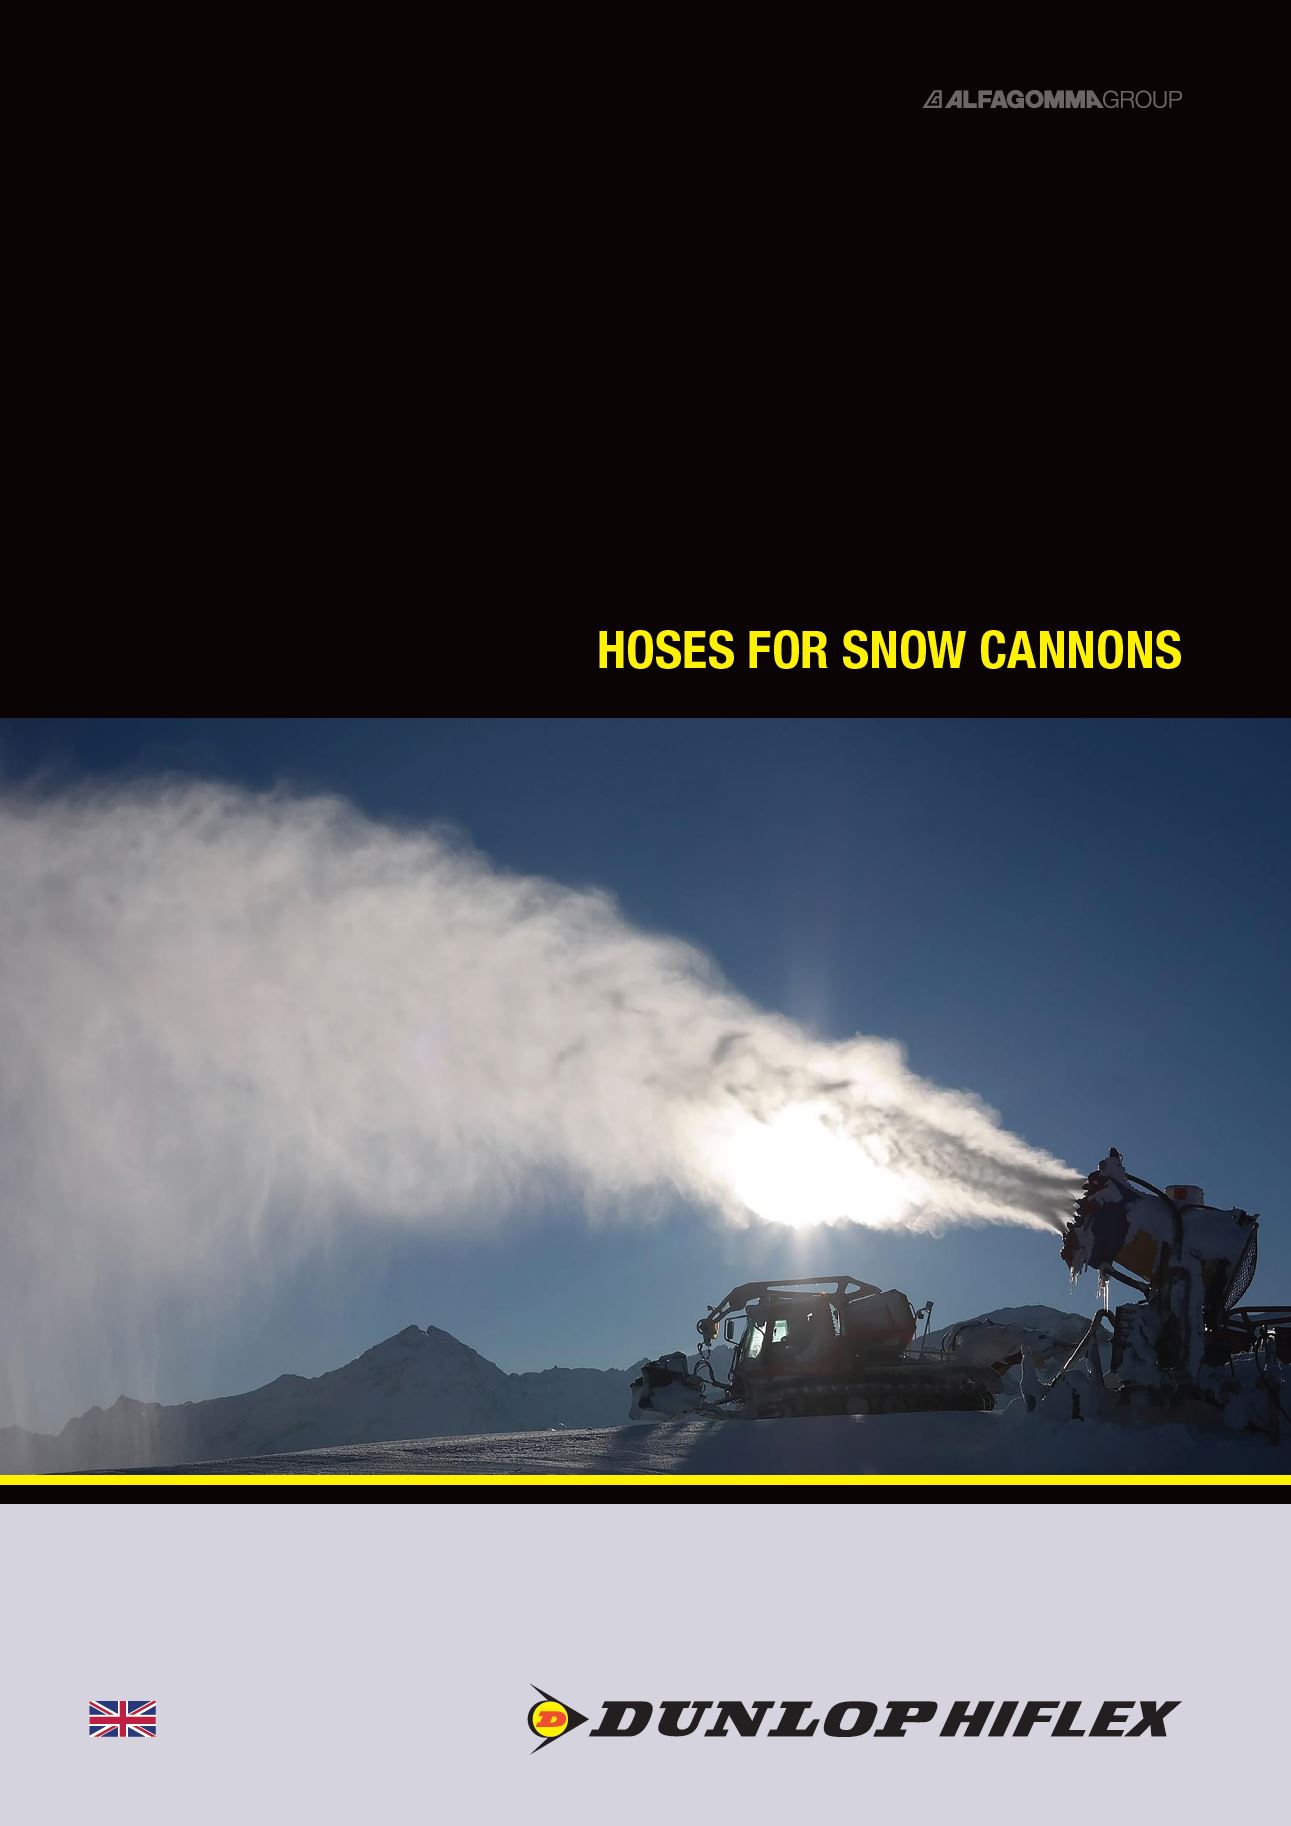 Hoses for snow cannons